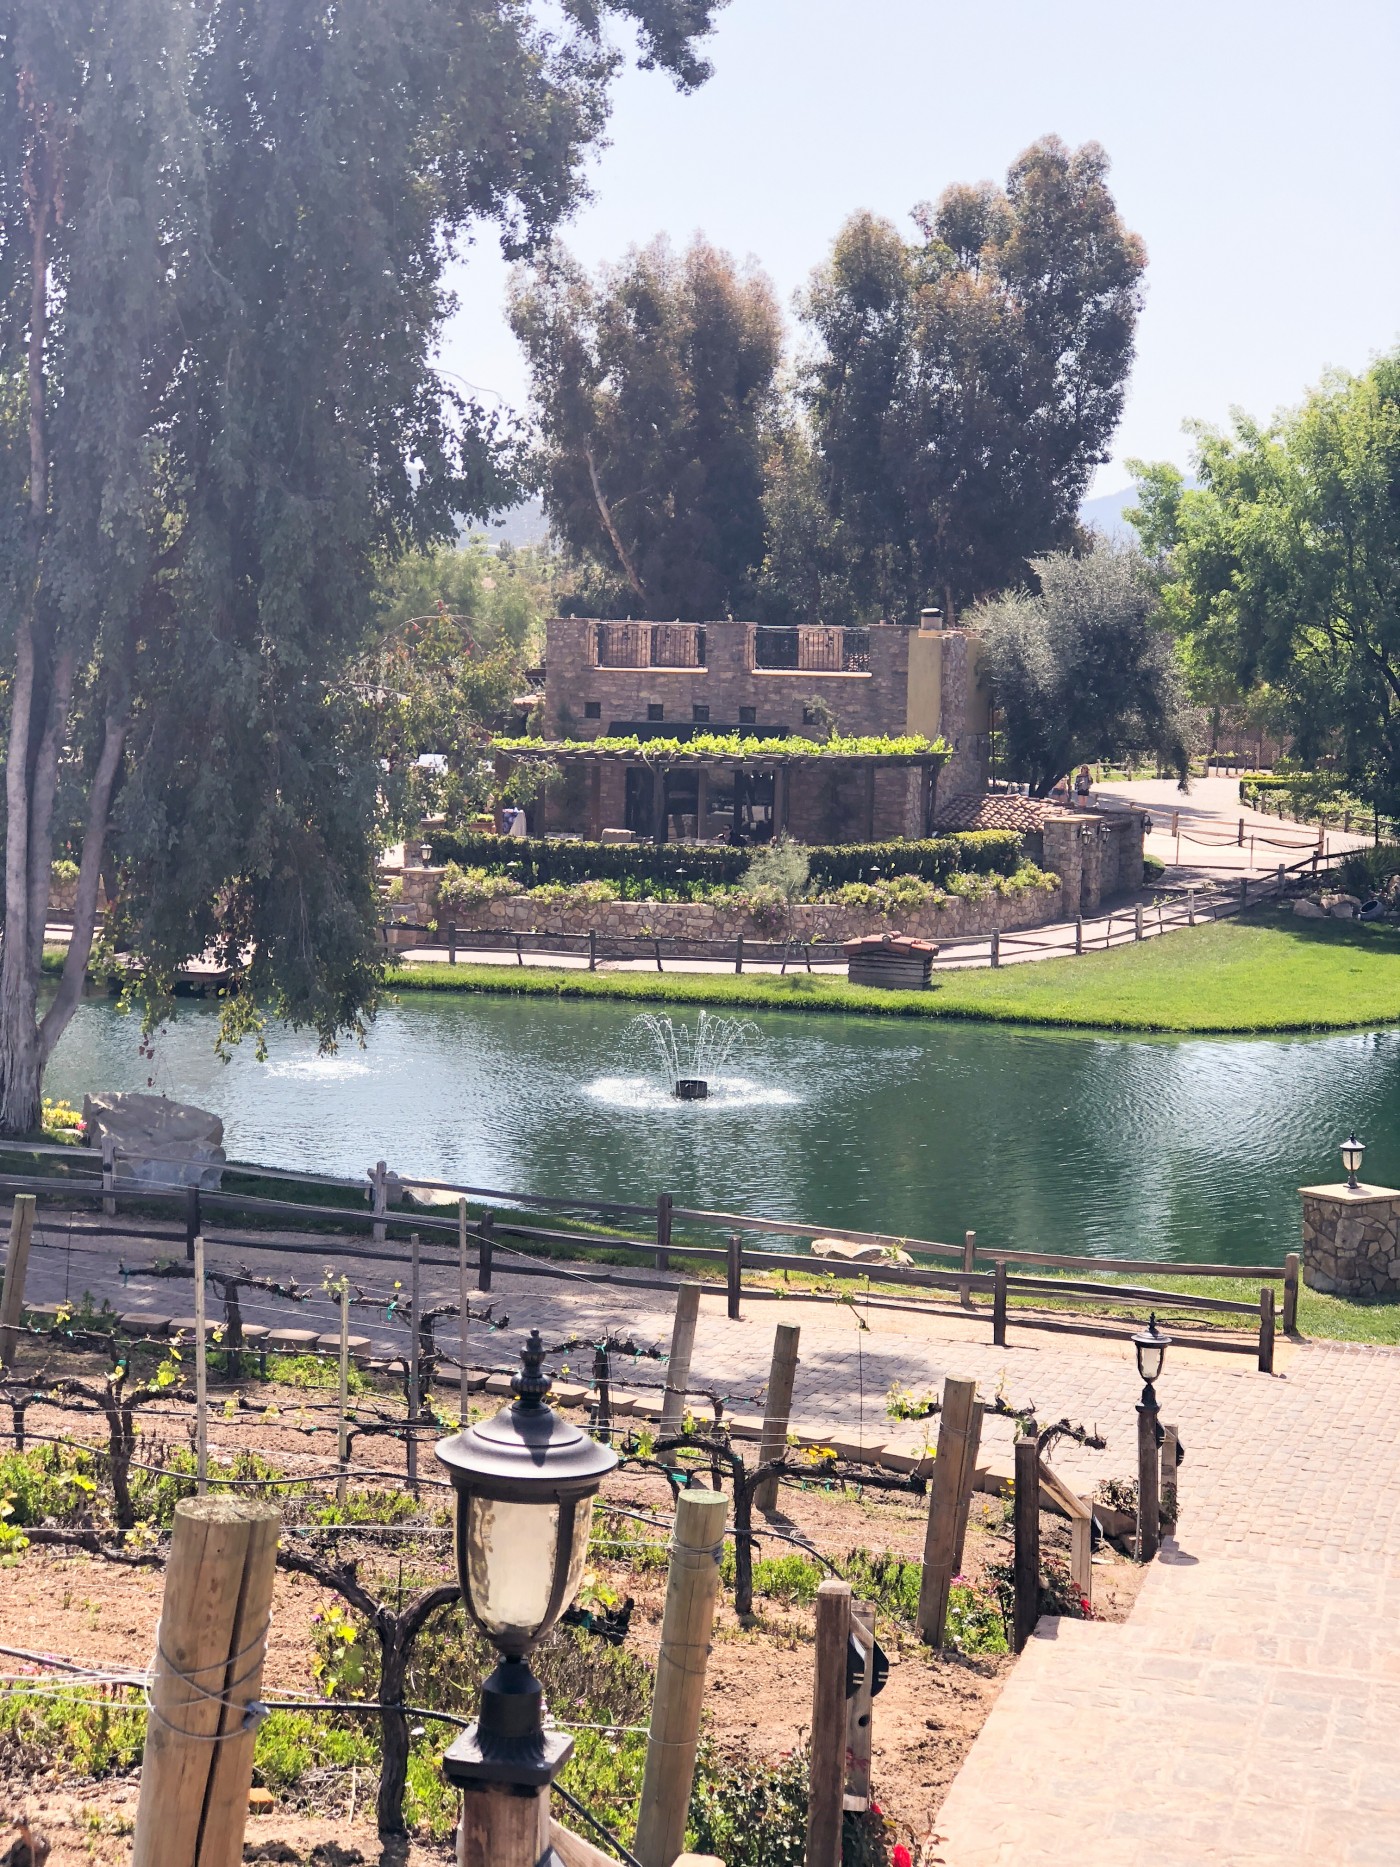 Summer is coming which of course means time to travel, right? Live in Southern California and need a bit of a staycation? See why you need to visit Temecula Valley this summer ASAP!